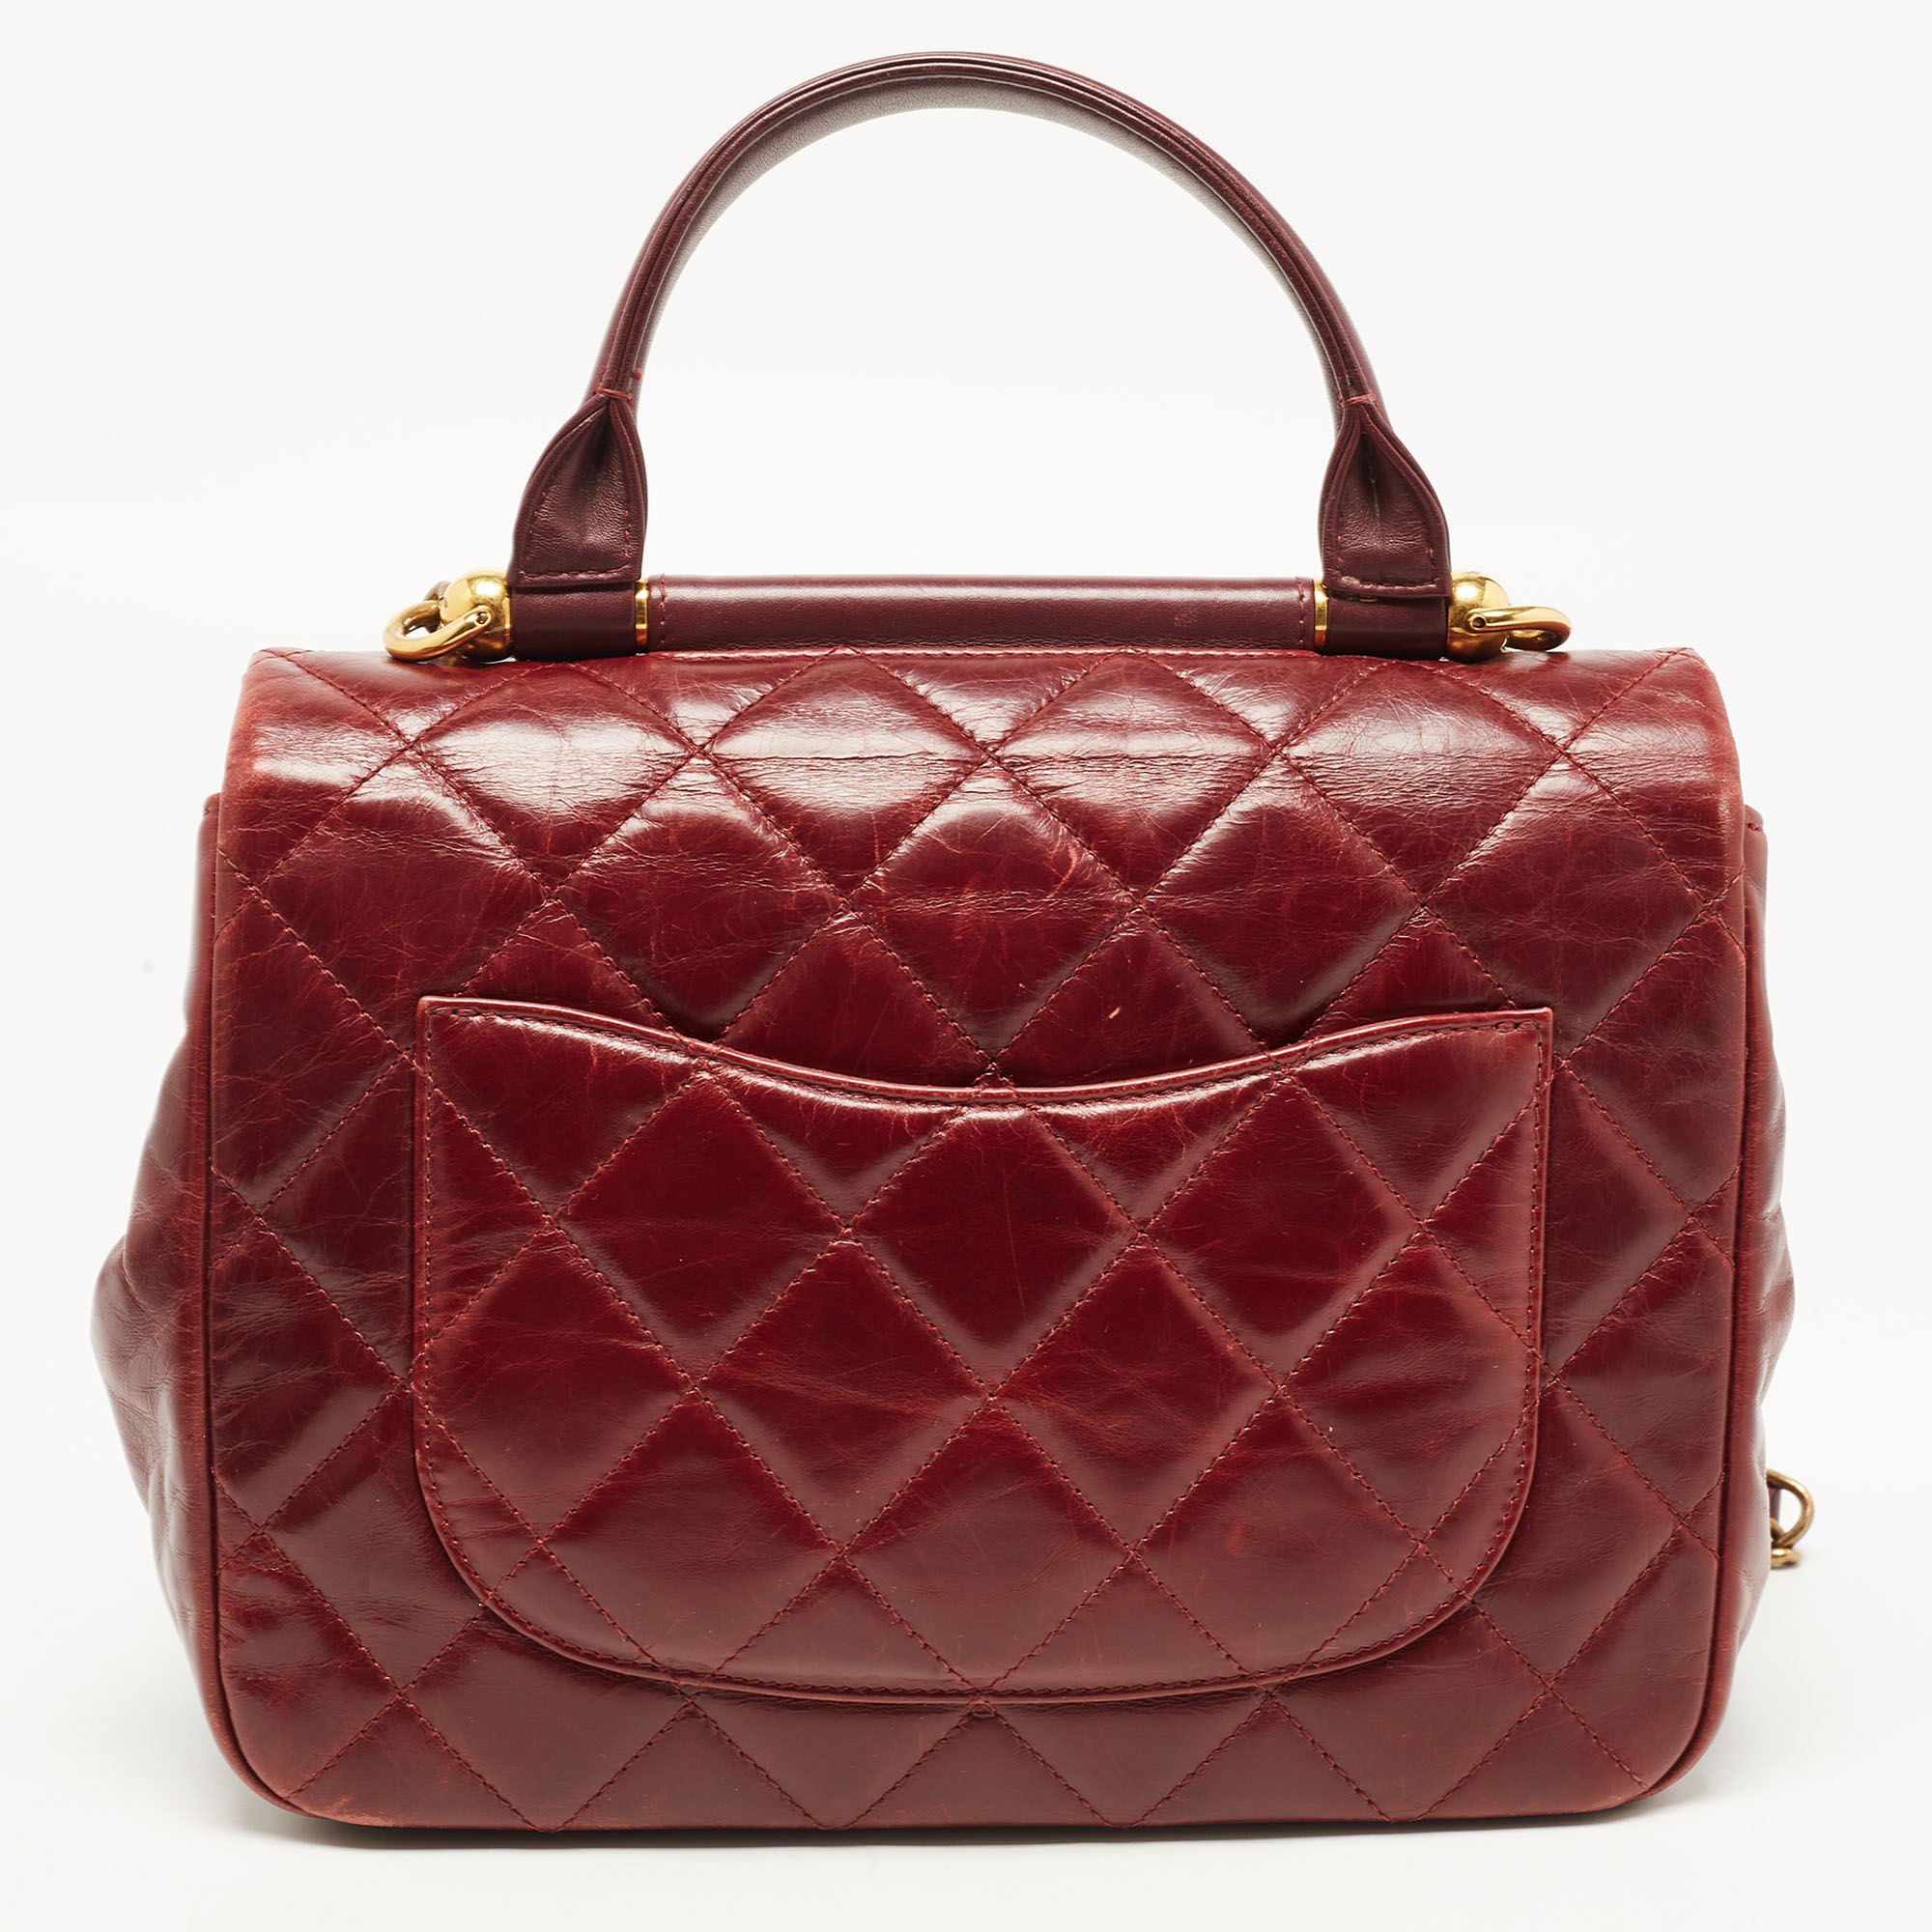 Chanel Burgundy Quilted Leather Gold Bar Top Handle Bag